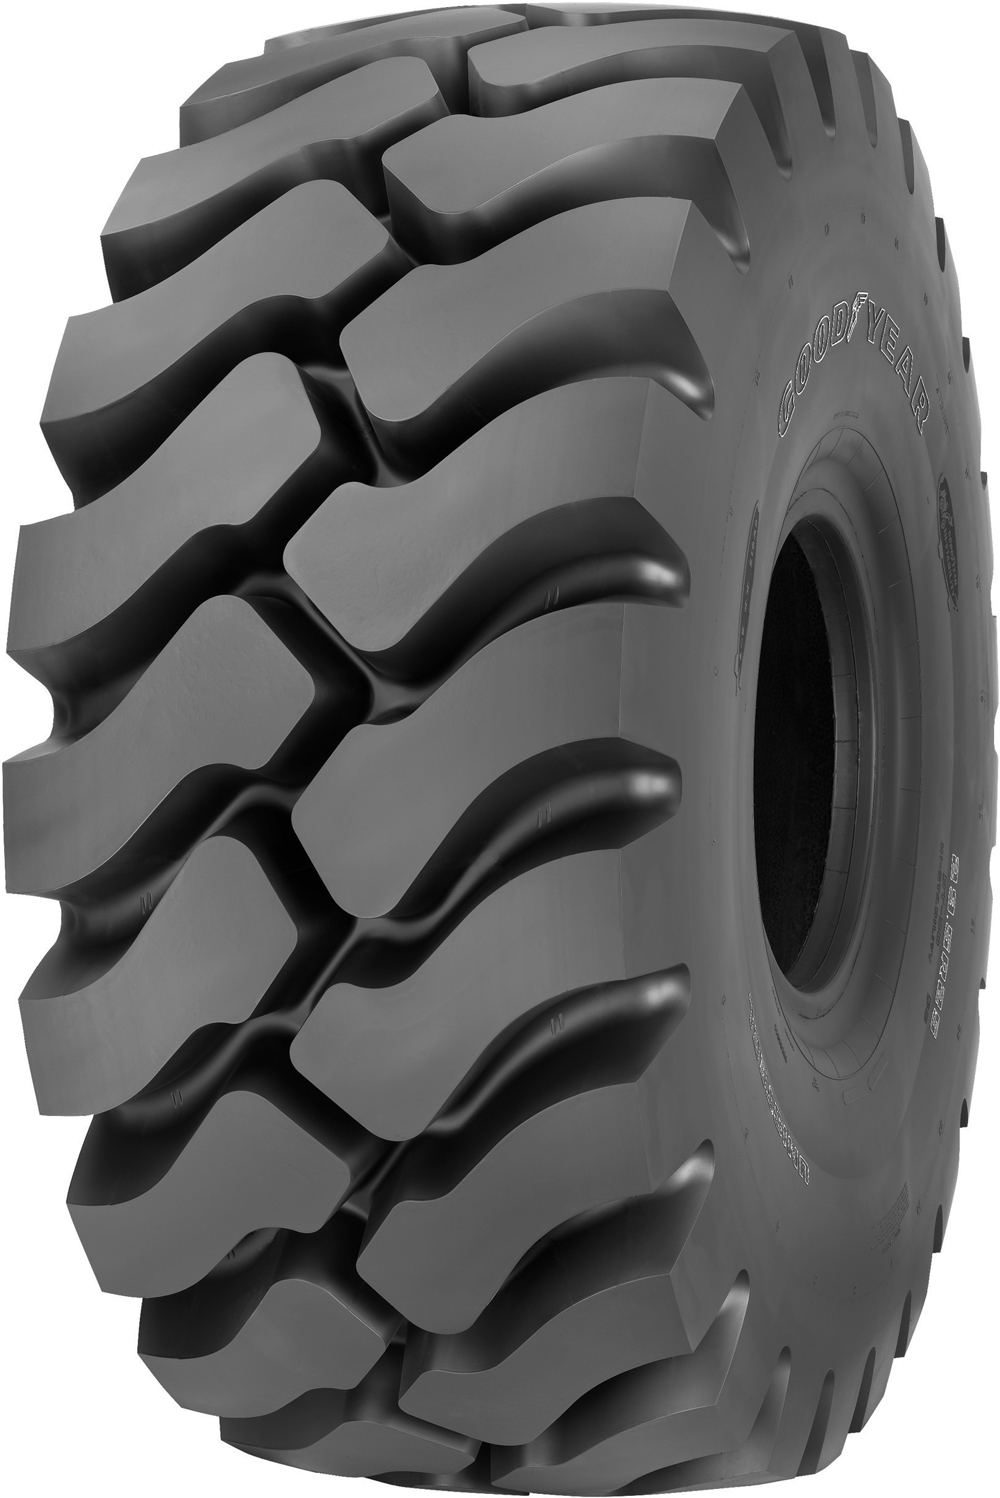 product_type-industrial_tires GOODYEAR RT-5D TL 29.5 R25 216A2